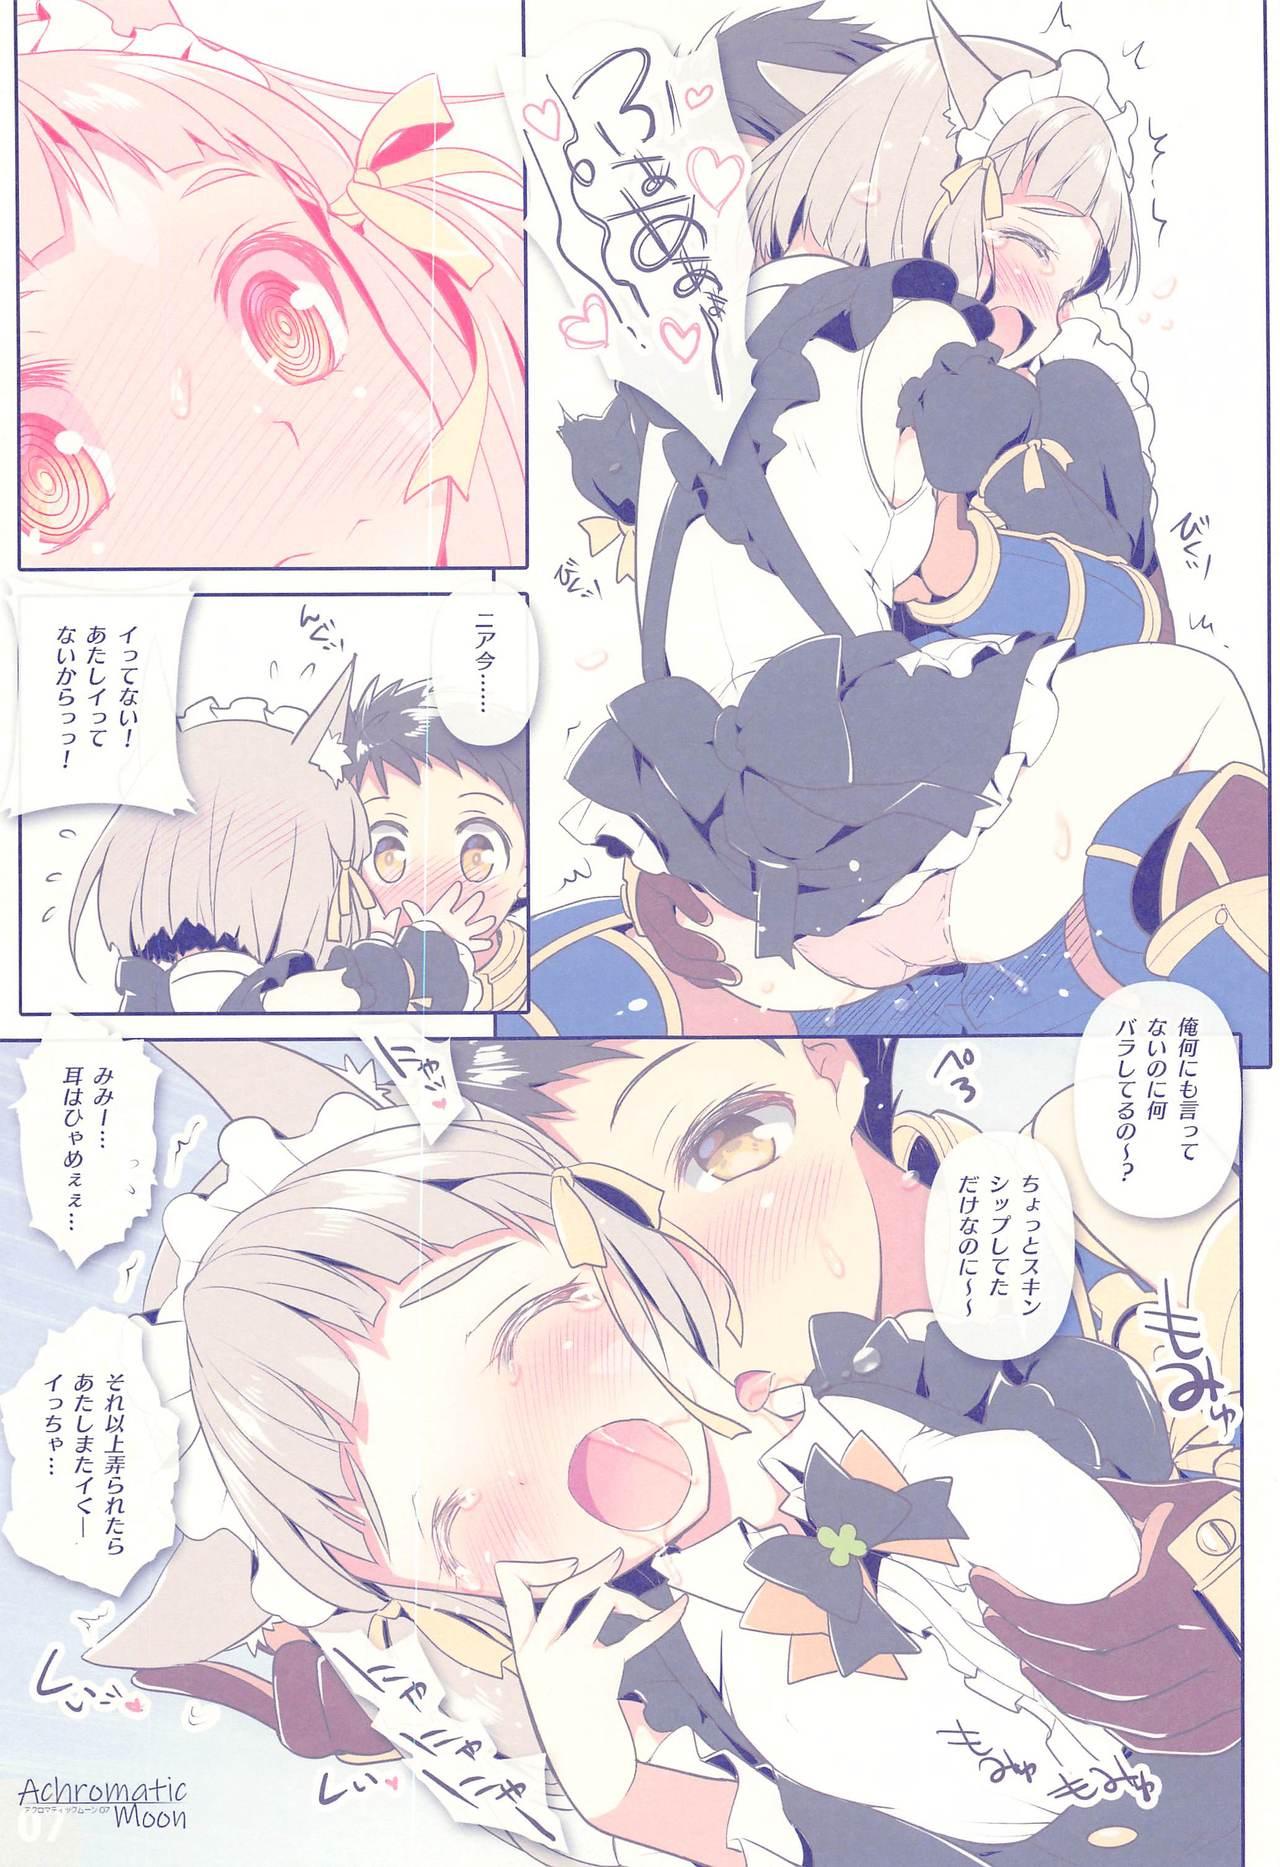 Best Blow Job Ever Achromatic Moon 07 - Xenoblade chronicles 2 Hotporn - Page 6